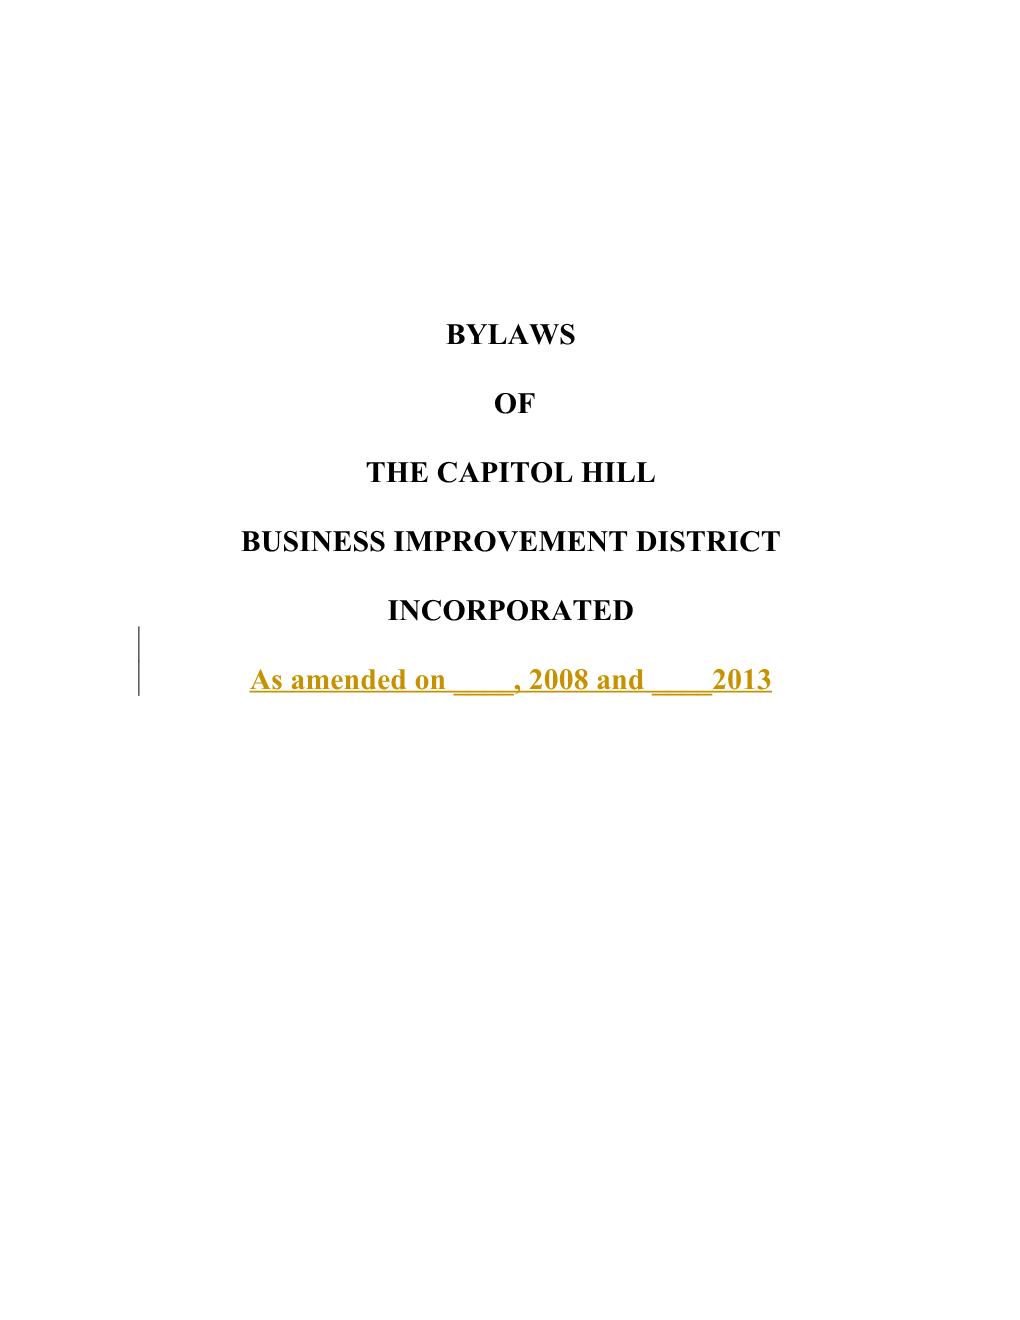 Bylaws of the Capitol Hill Business Improvement District Incorporated